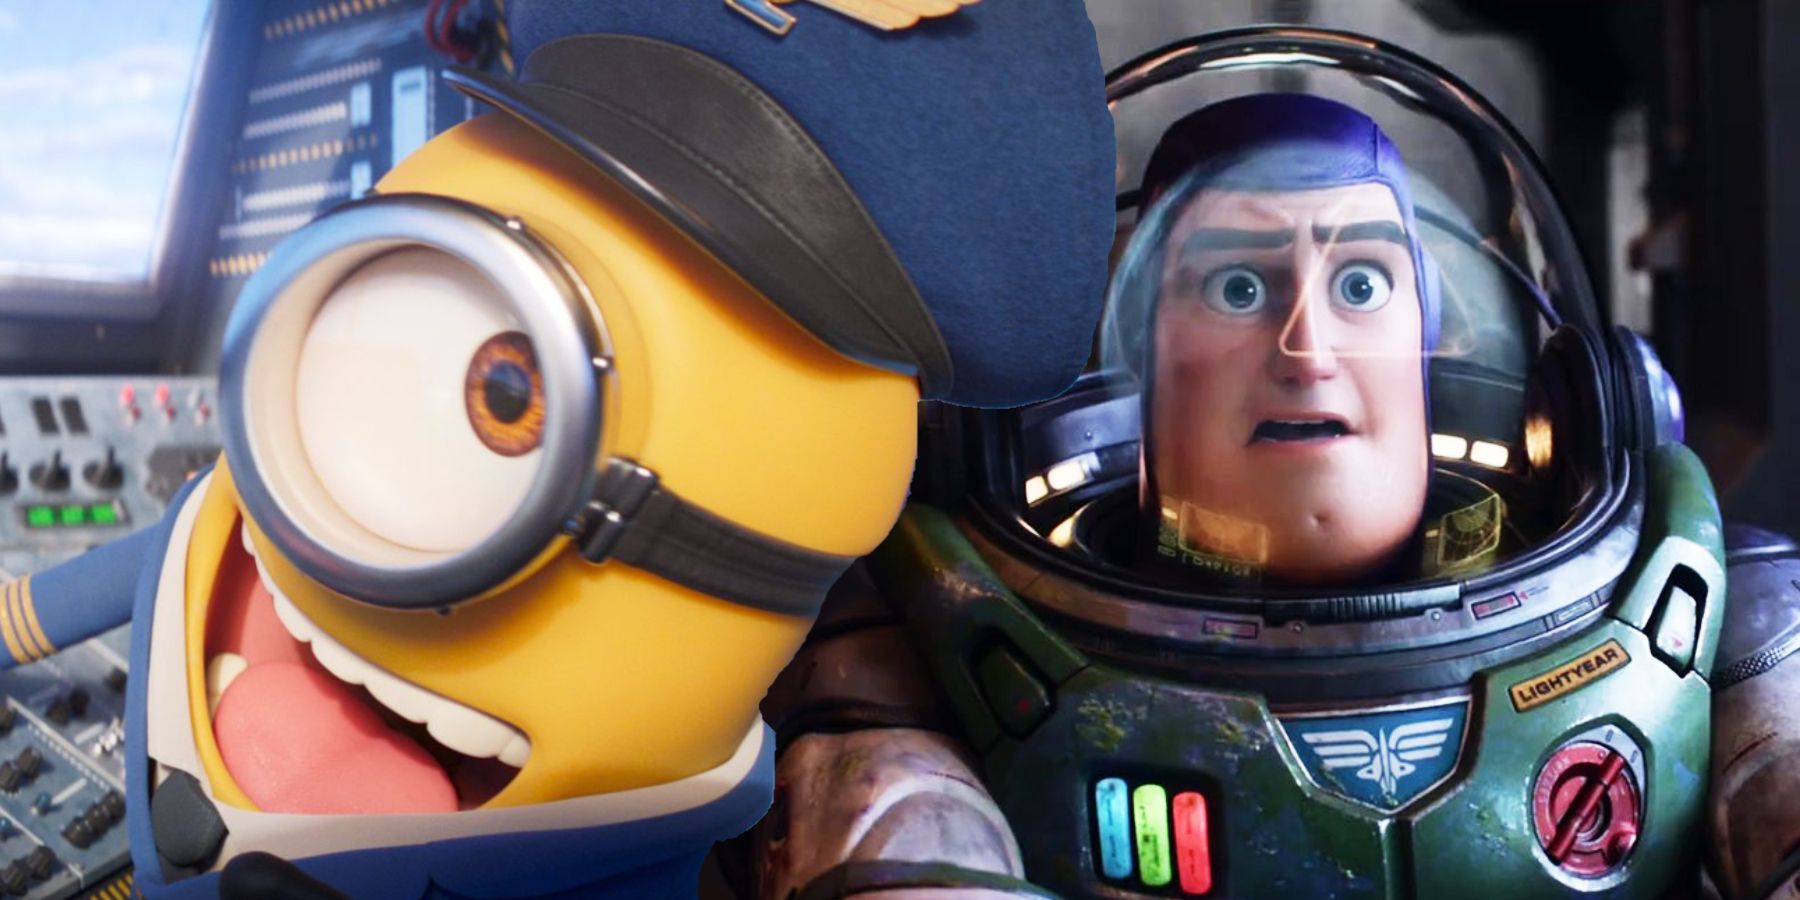 Why Minions: The Rise Of Gru's Box Office Completely Destroyed Lightyear